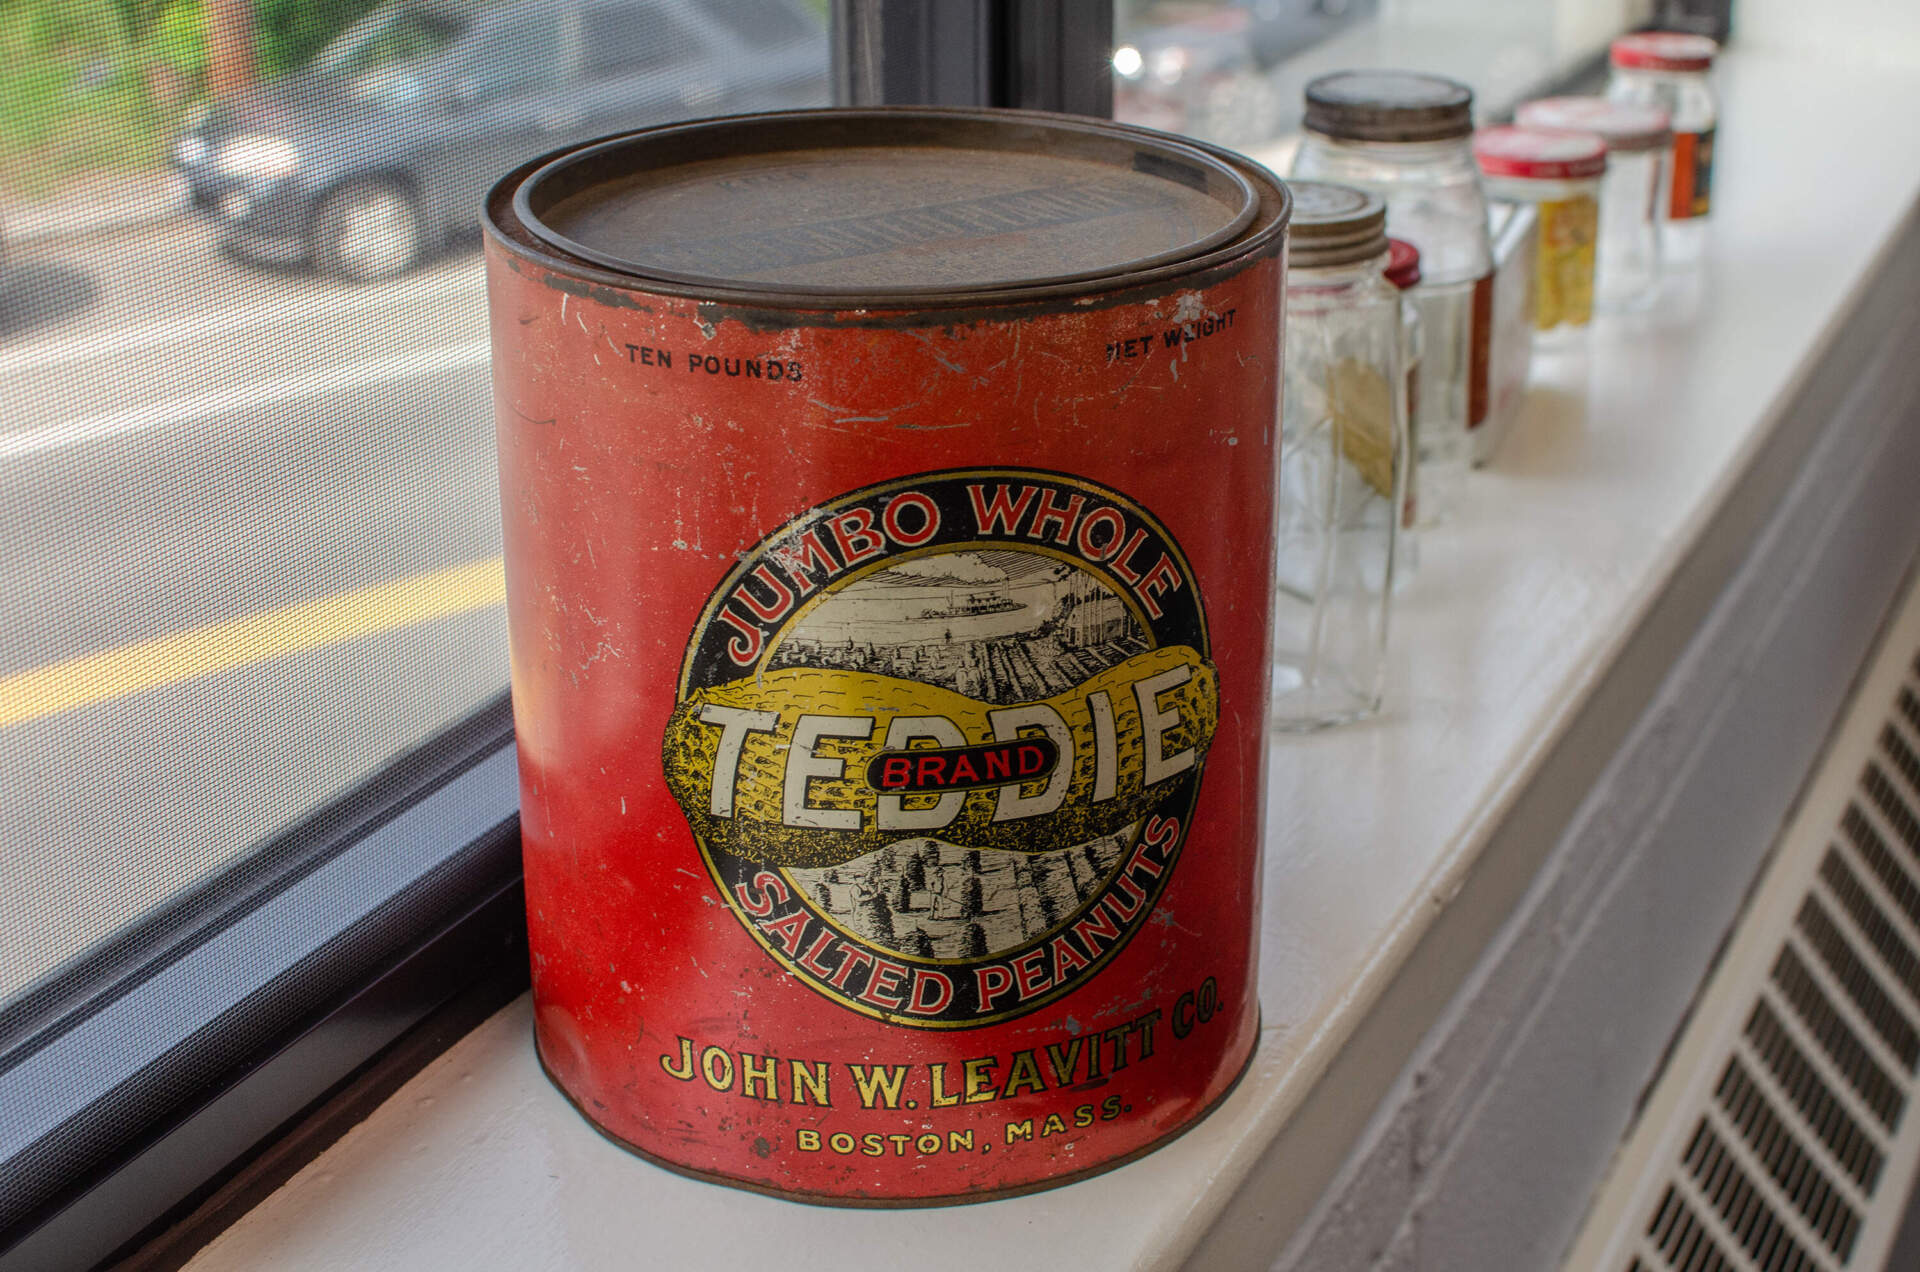 A container for Teddie salted peanuts, circa 1937, in the early days of the nearly-century-old company (Sharon Brody/WBUR)